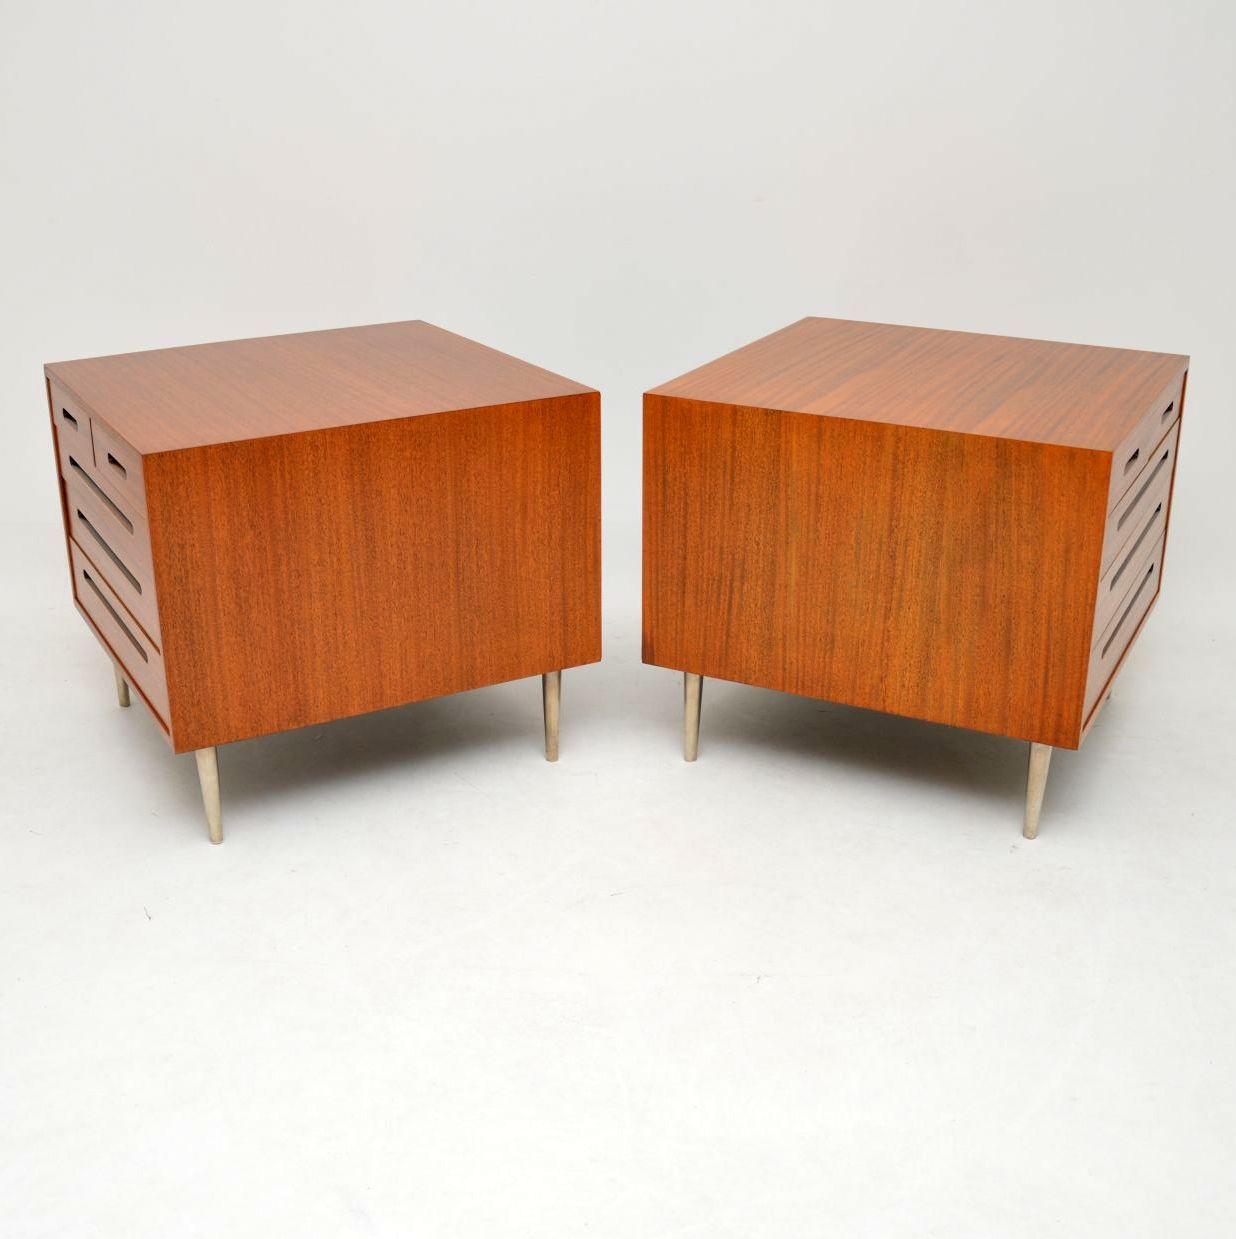 American 1960s Pair of Vintage Mahogany Chests by Edward Wormley for Dunbar